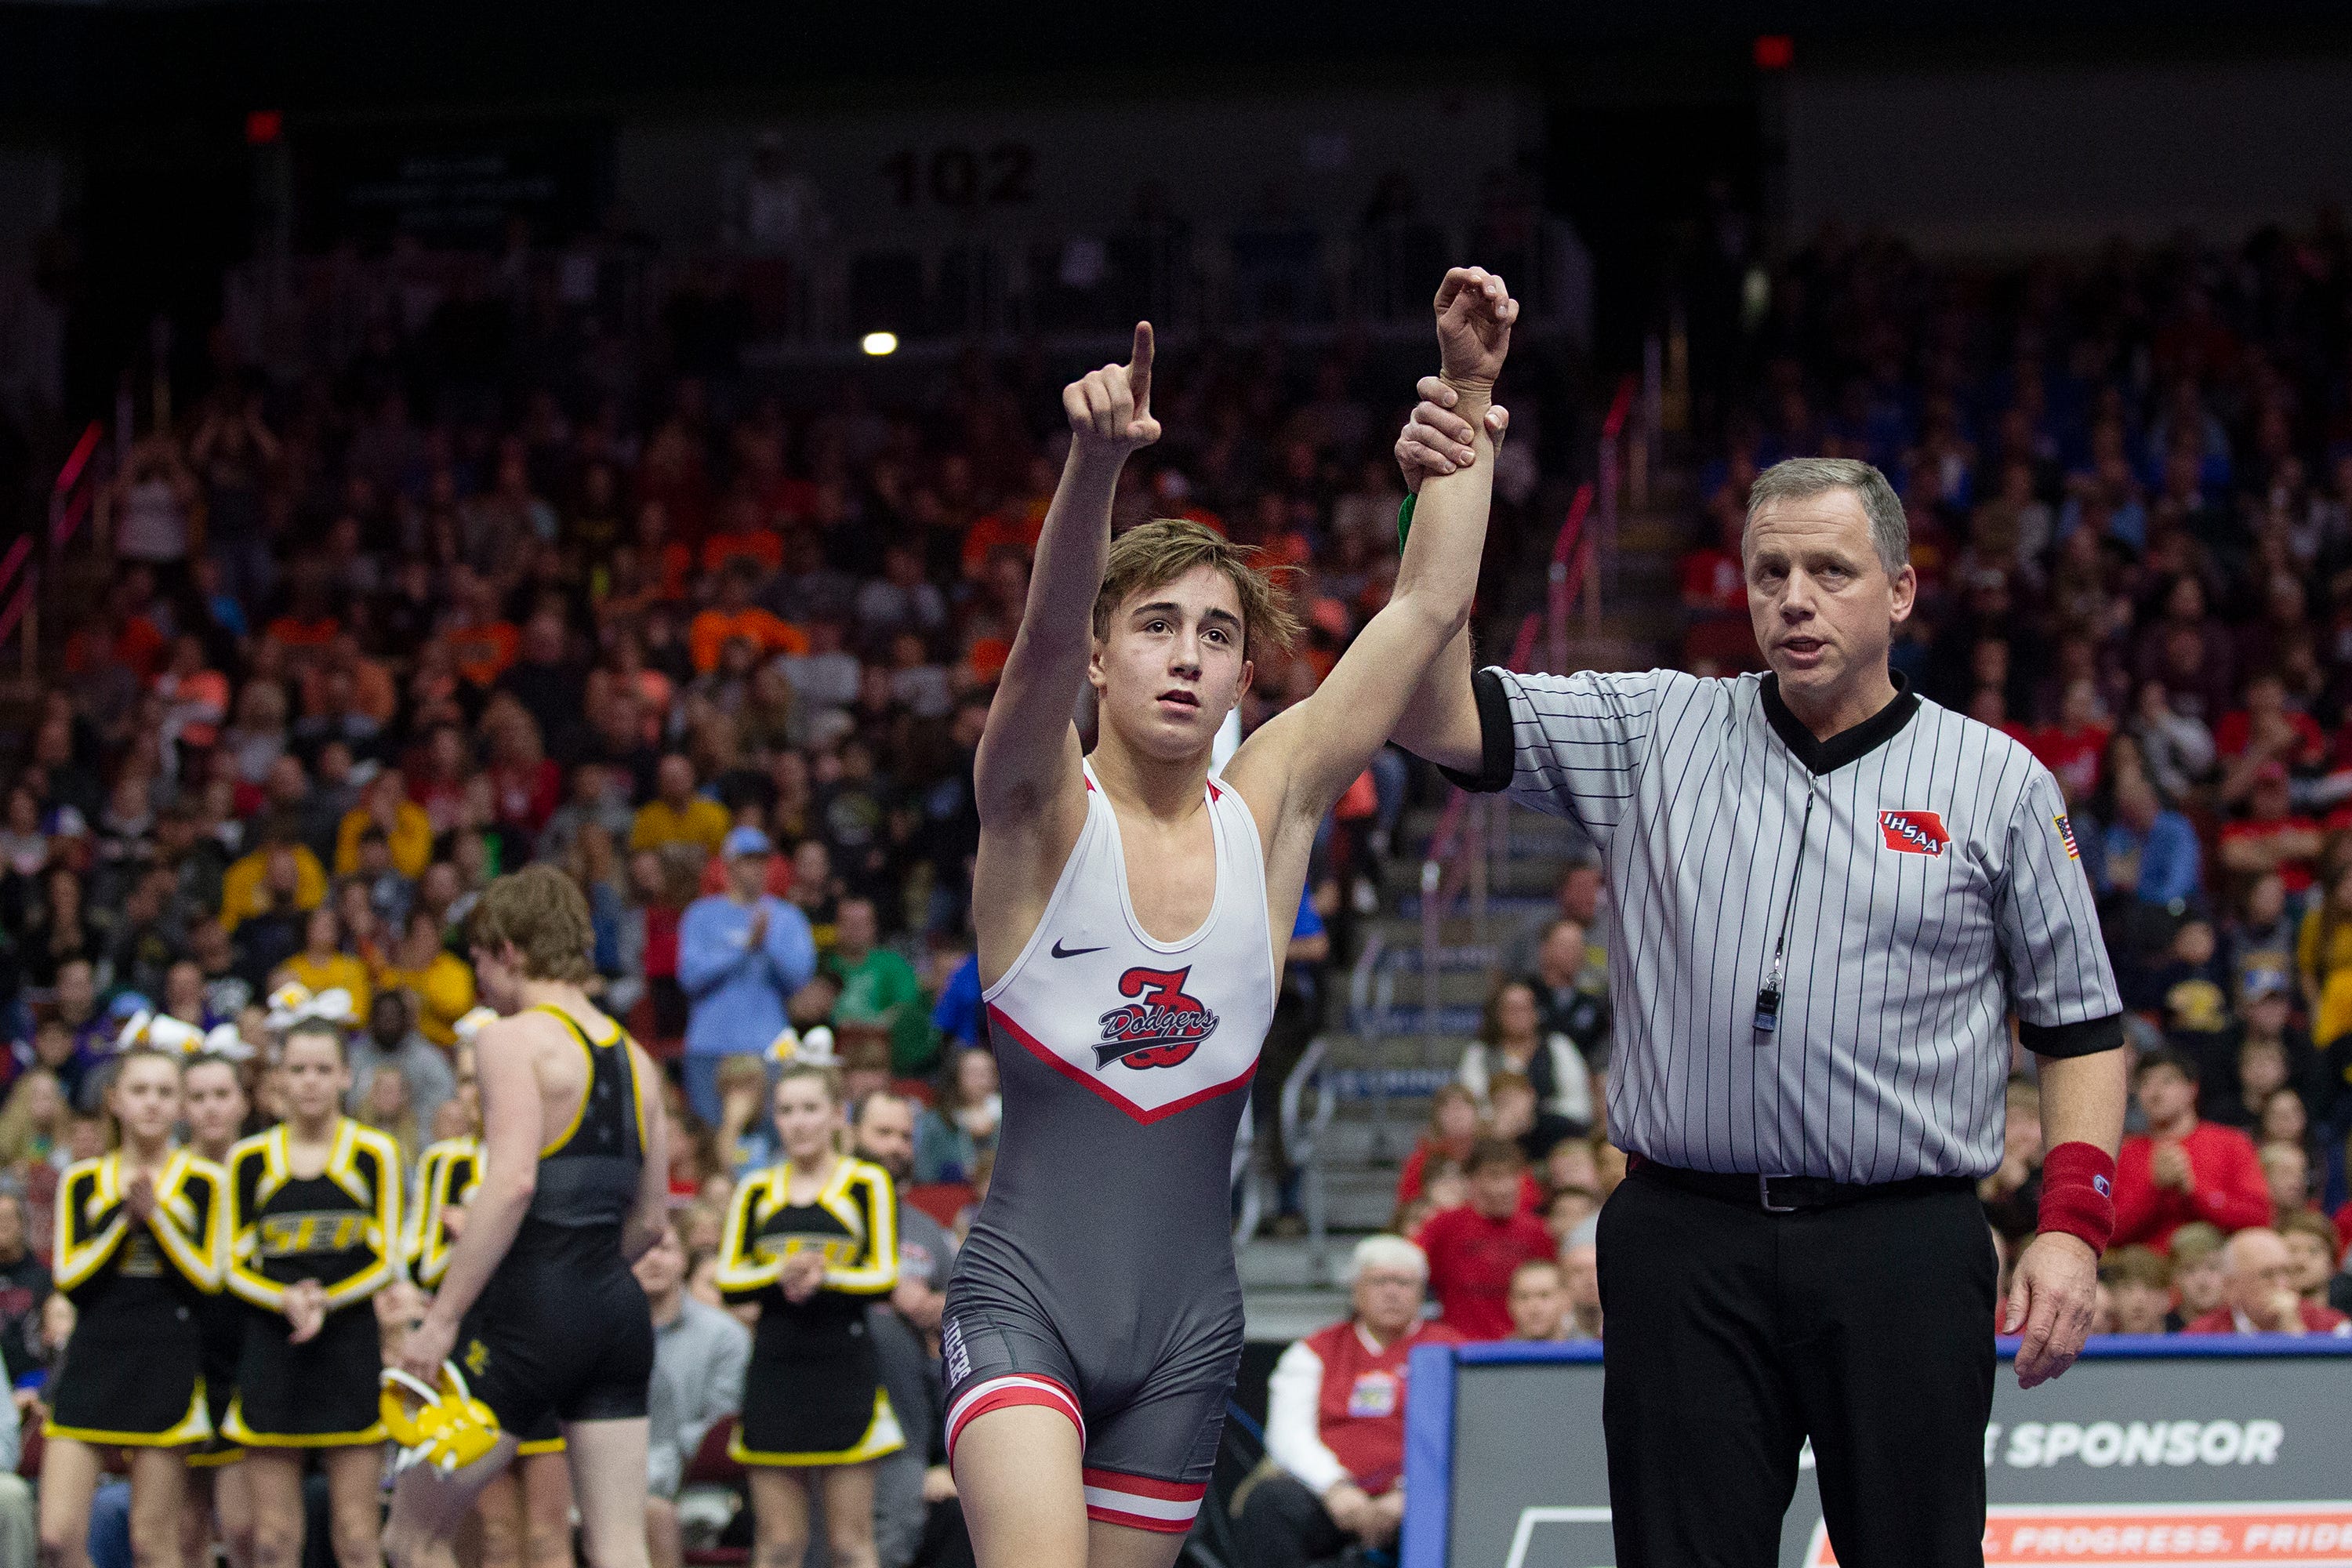 State wrestling 2019 All of this year's Iowa high school wrestling